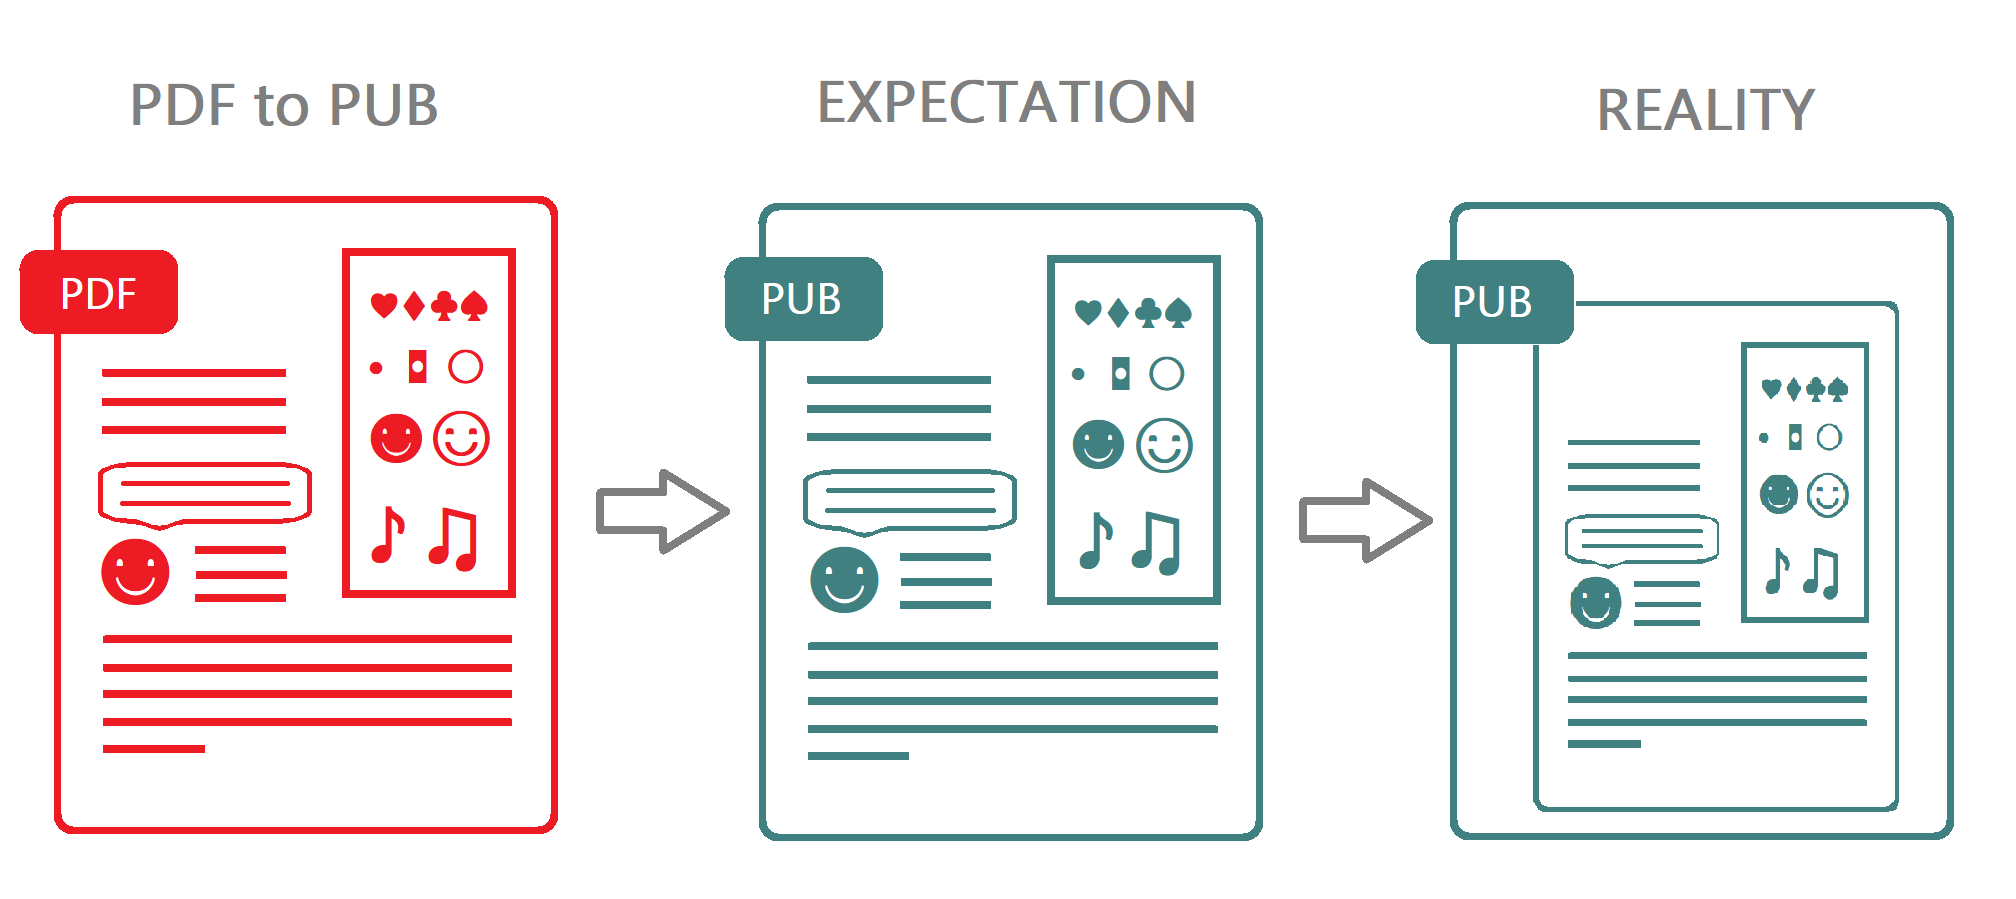 PDF to PUB, expectation and reality